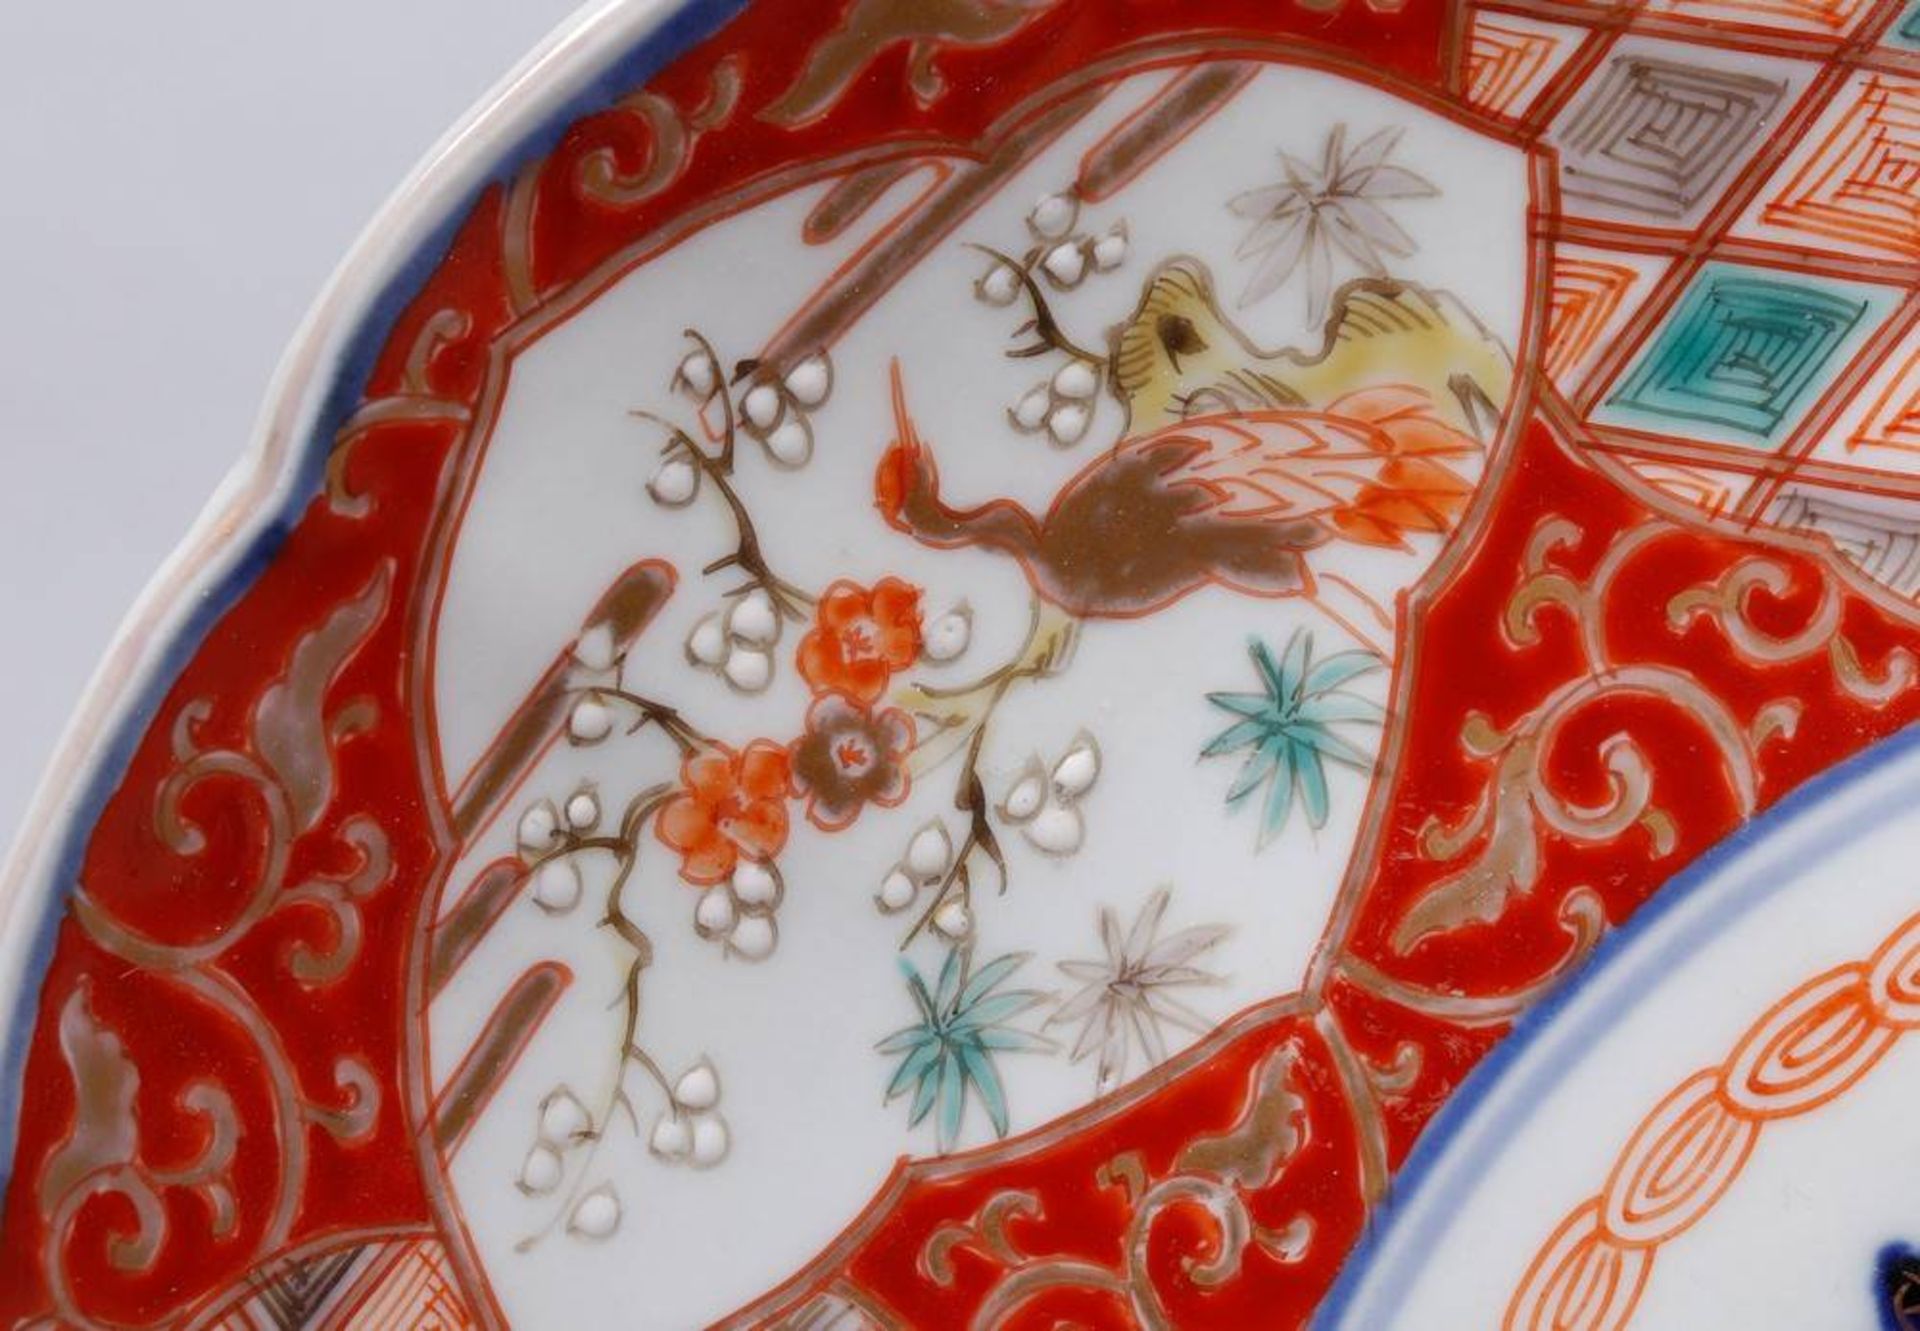 Imari-dish, China, 19th C., porcelain, painted in underglaze blue/iron red/green/gold and grey  - Image 3 of 3